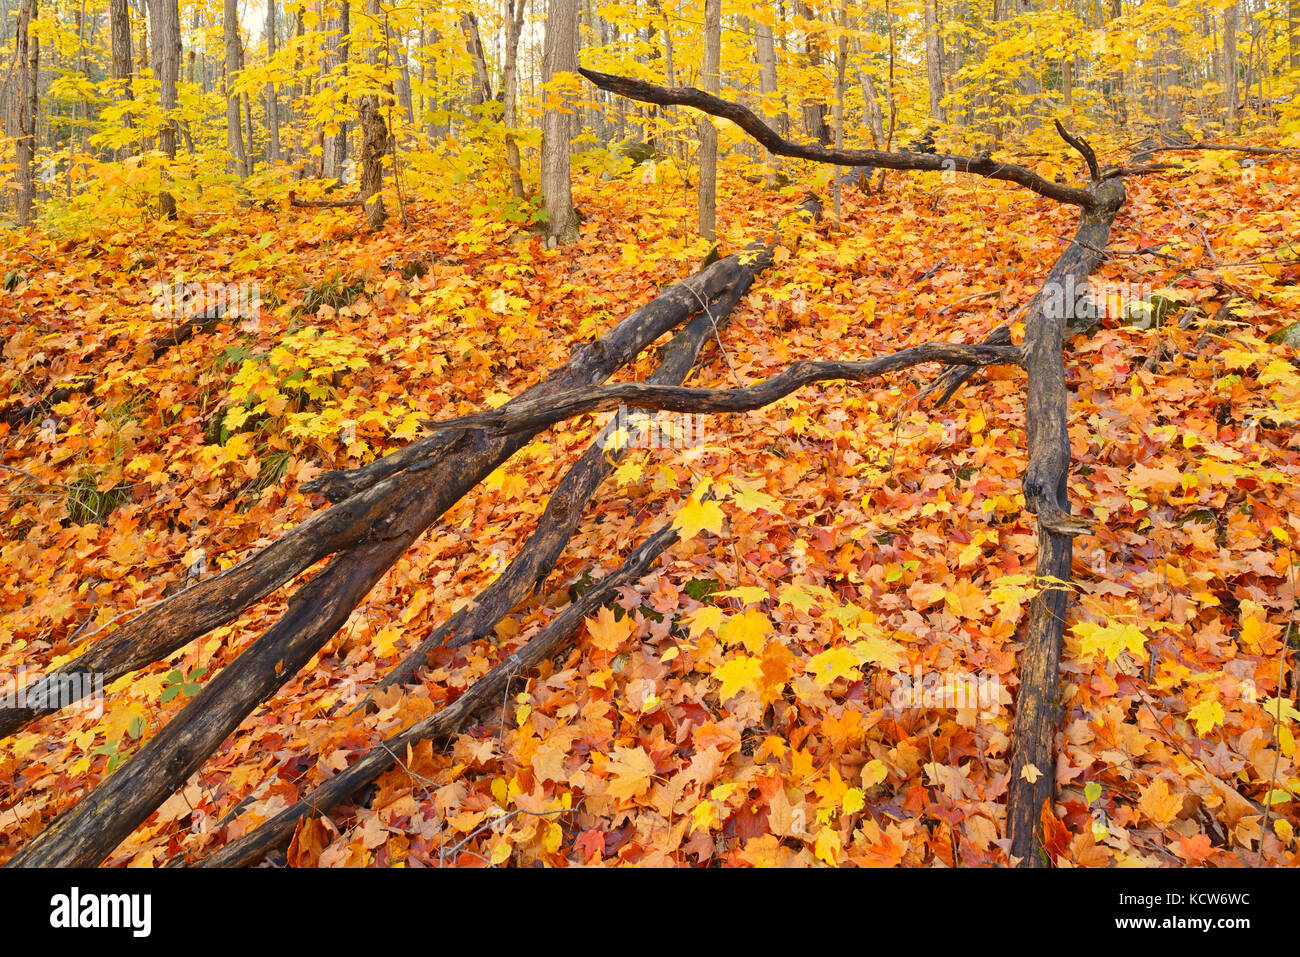 leaves of sugar maple trees (Acer saccharum) on forest floor, Parry Sound, Ontario, Canada Stock Photo